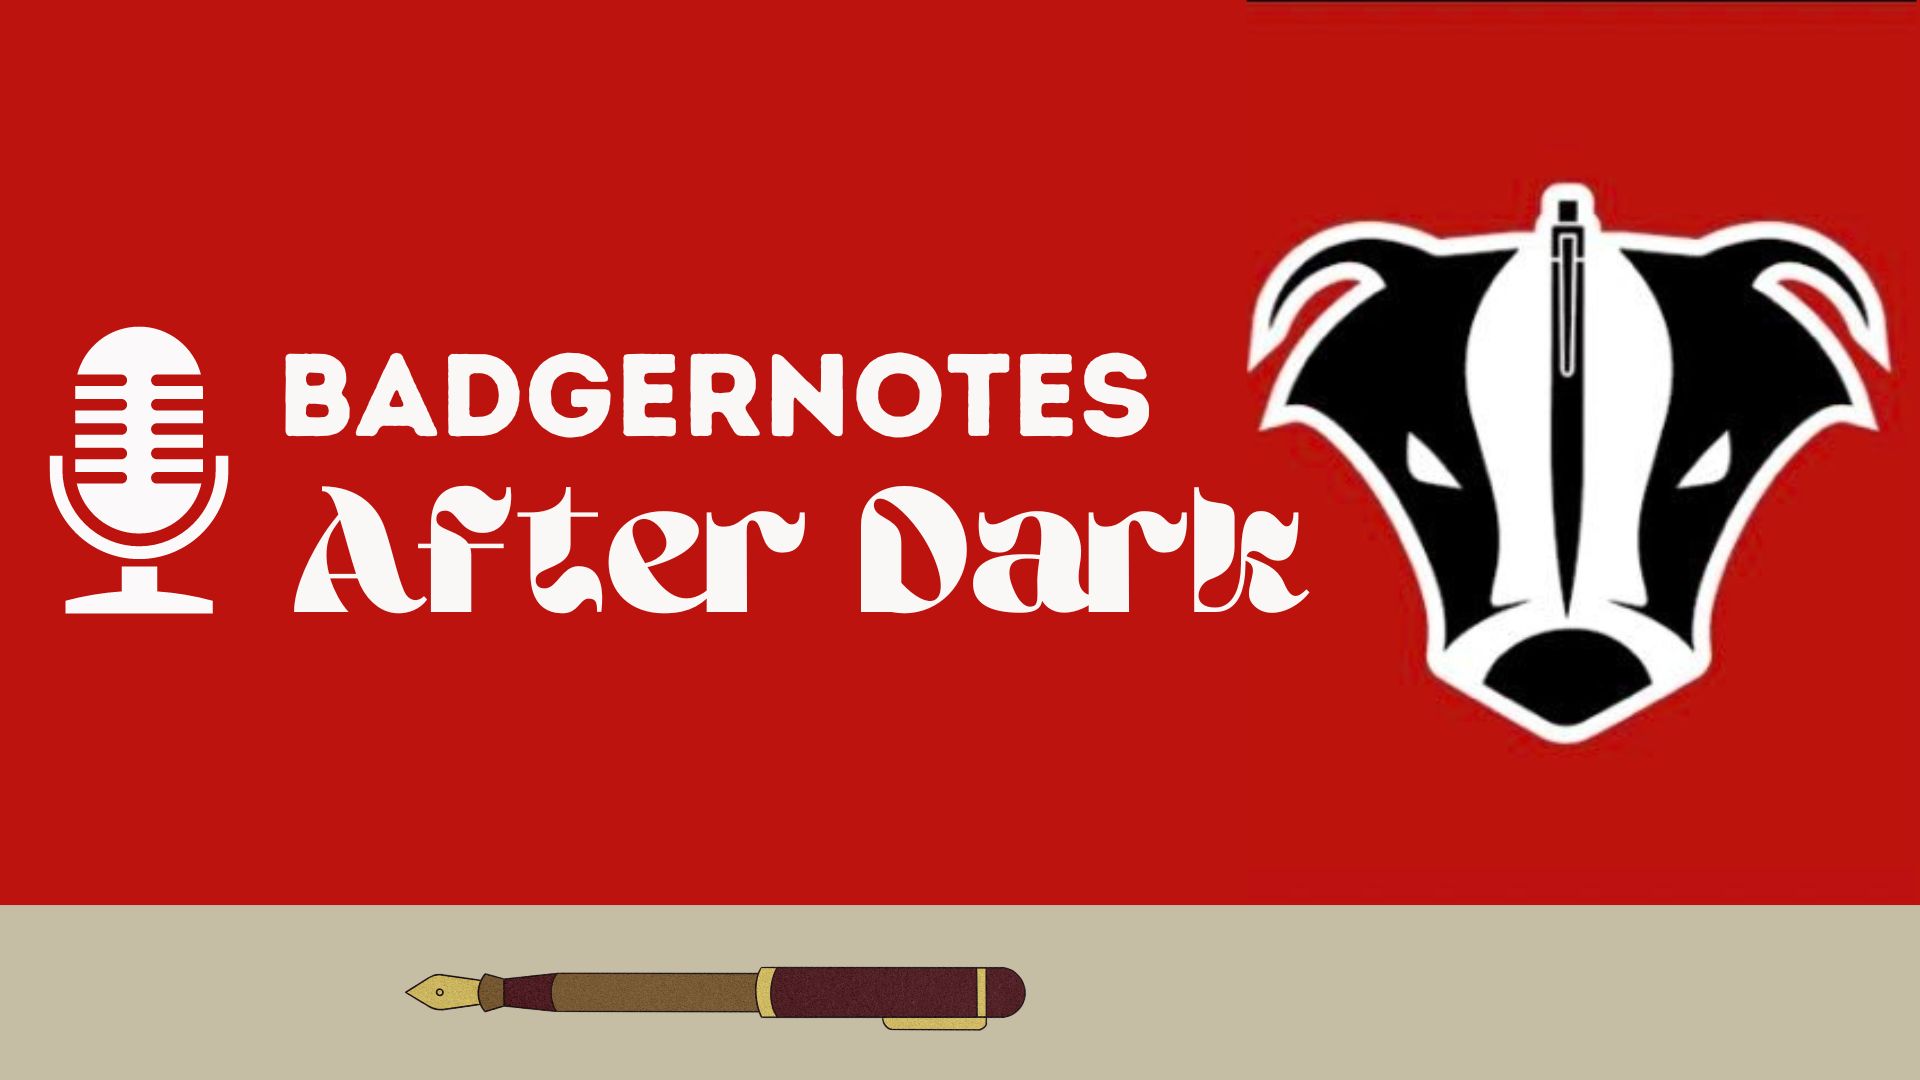 Wisconsin Badgers Football & Basketball Podcast: BadgerNotes After Dark, Presented by Big Banter Sports